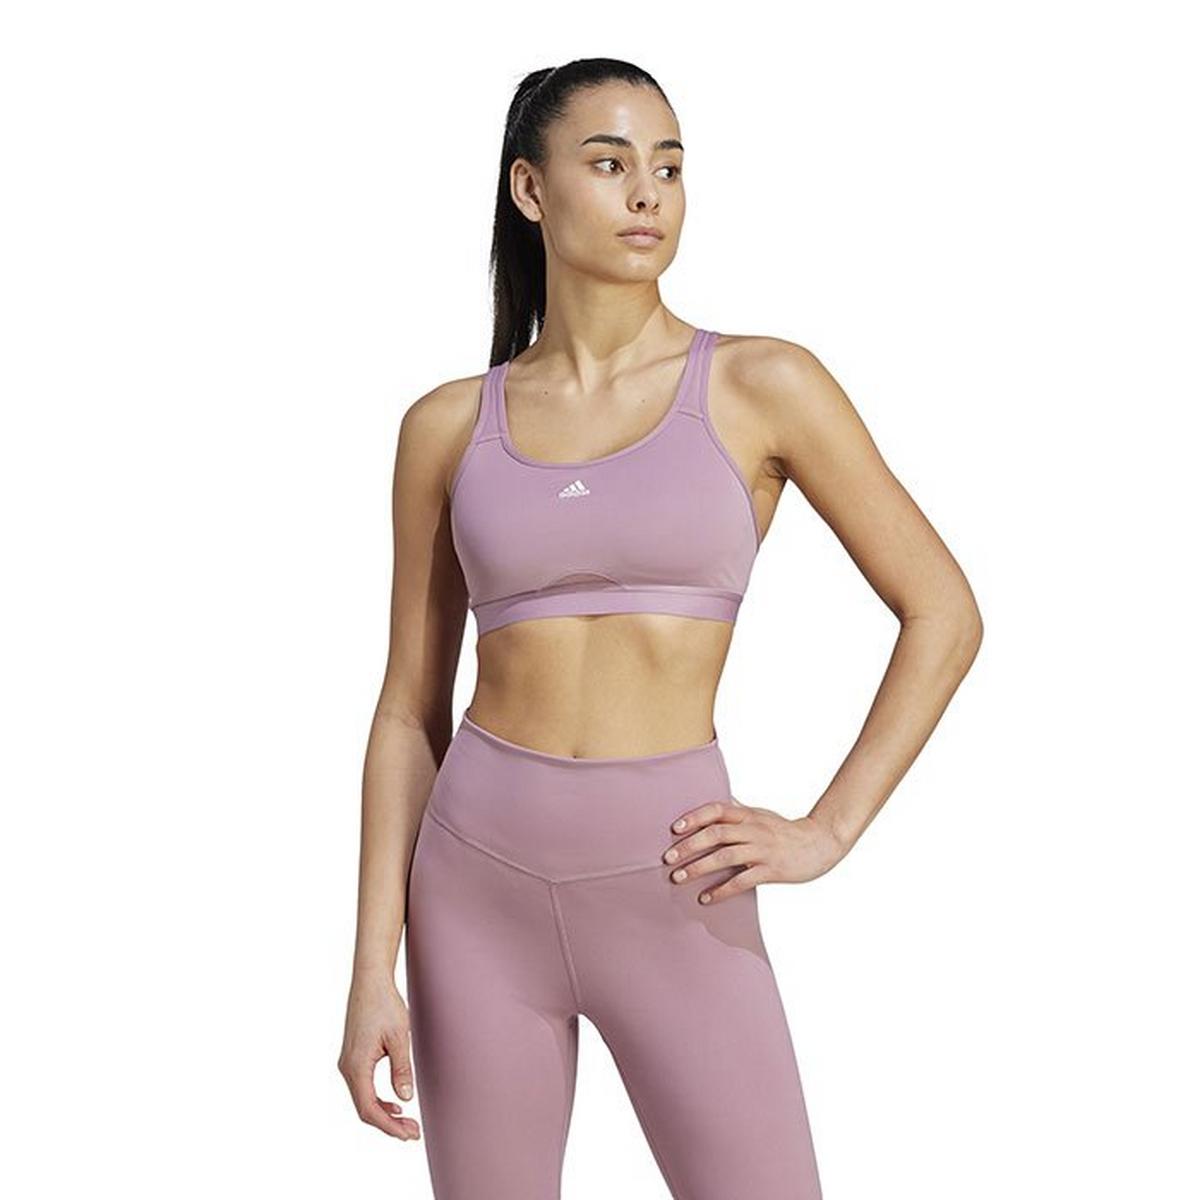 Women's TLRD Move Training High Support Sports Bra